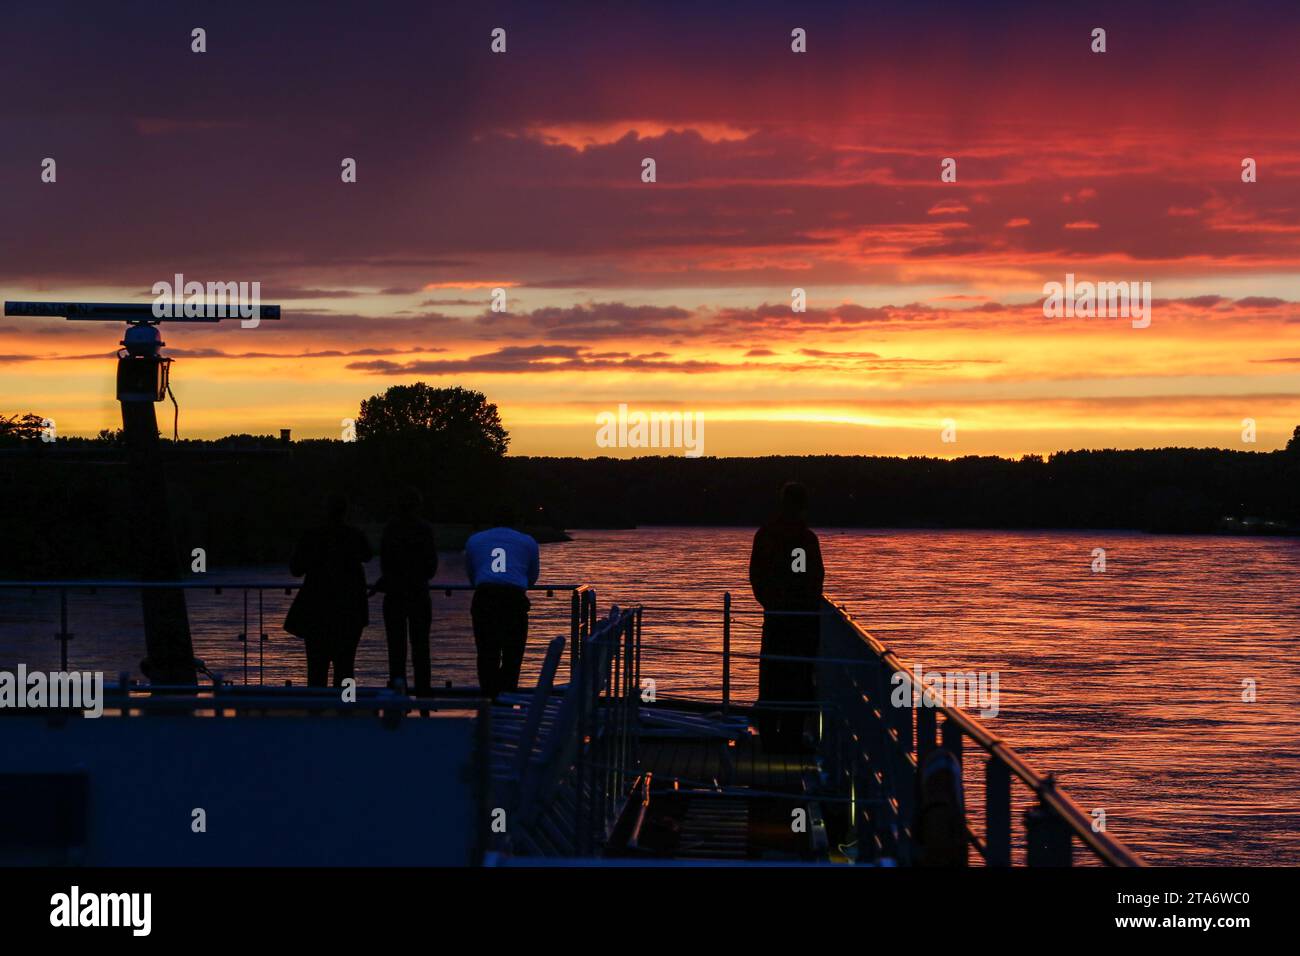 Magnificent sunset on Danube seen from a river cruise ship near Vukovar, eastern Slavonia region,at the border between Croatia (left) & Serbia (right) Stock Photo